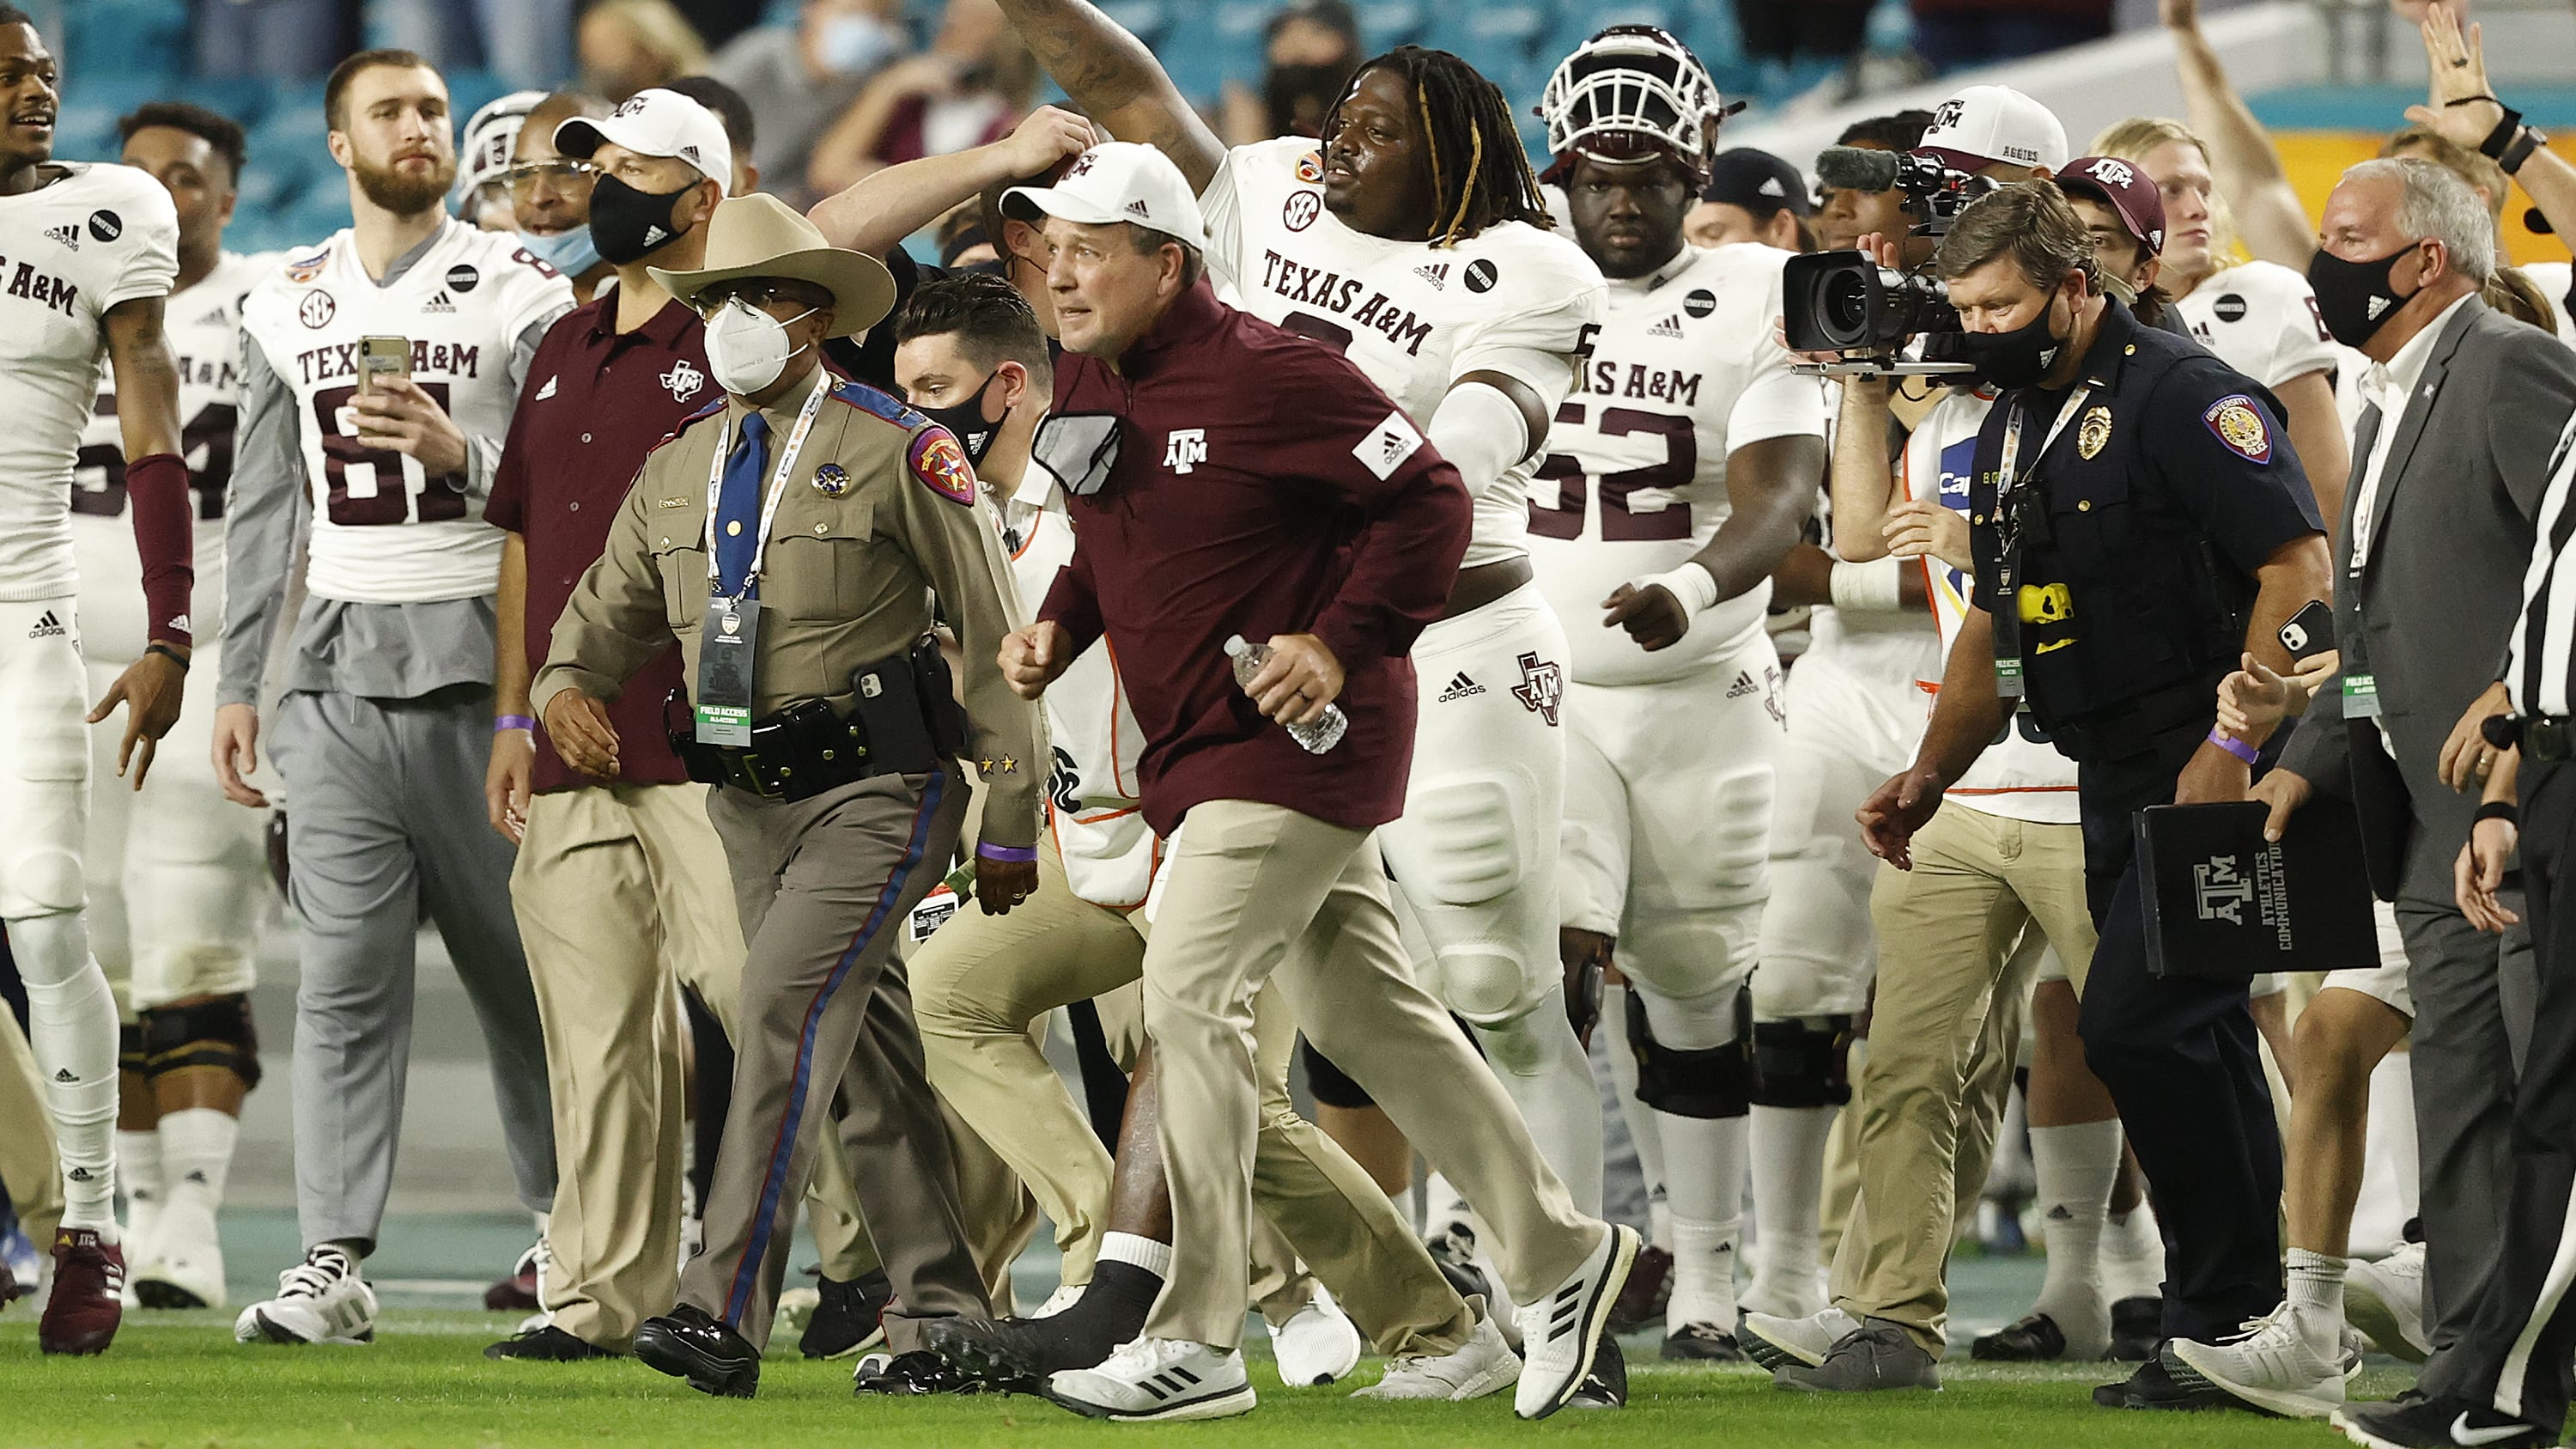 2021 Texas A&M Win Total: Odds, Betting Trends, & Over/Under